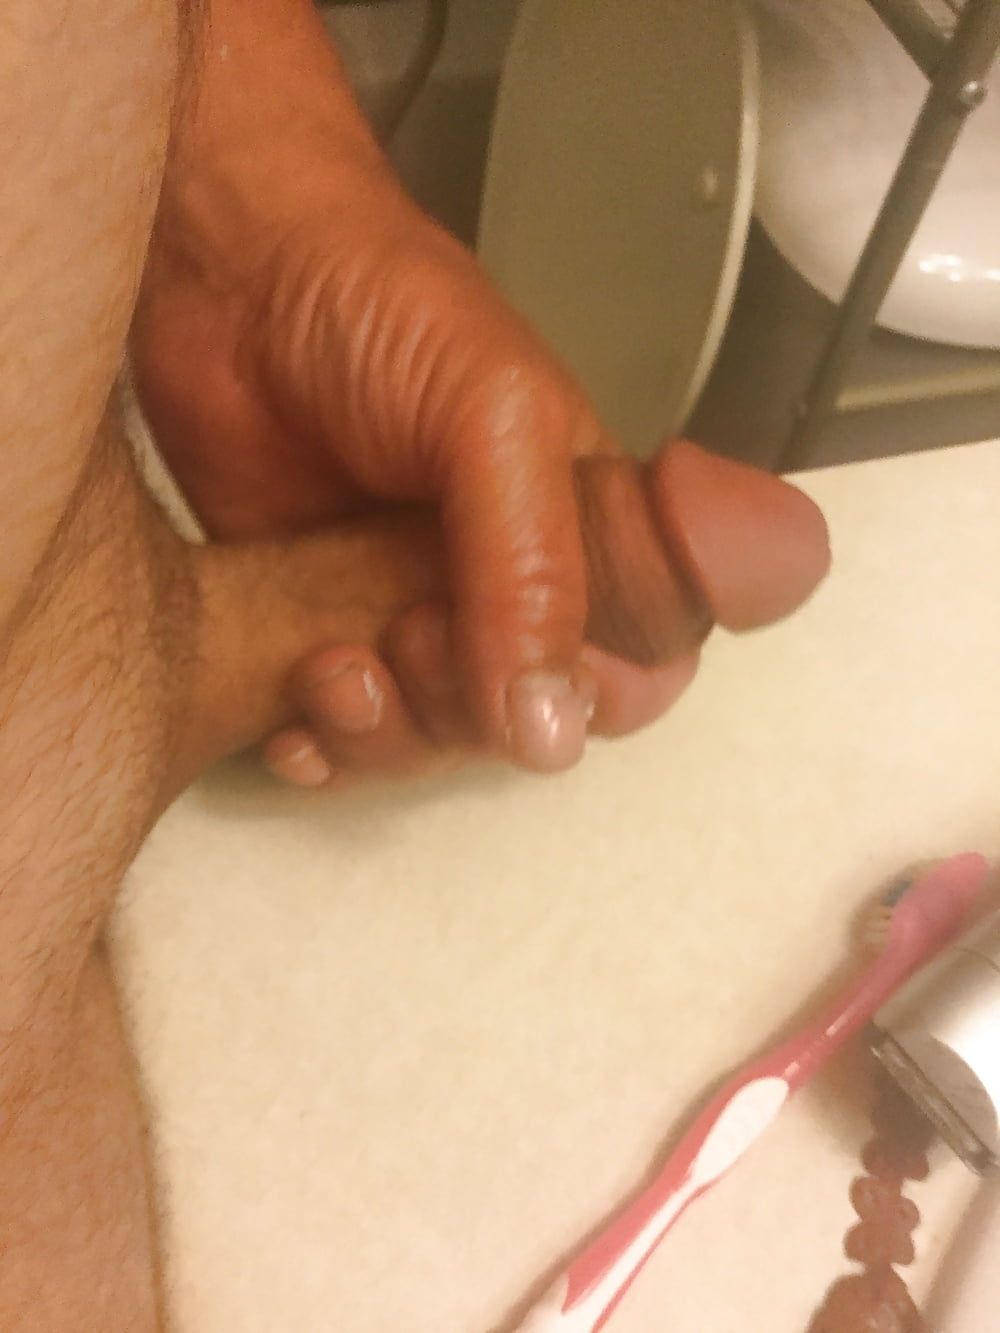 Just my cock #8